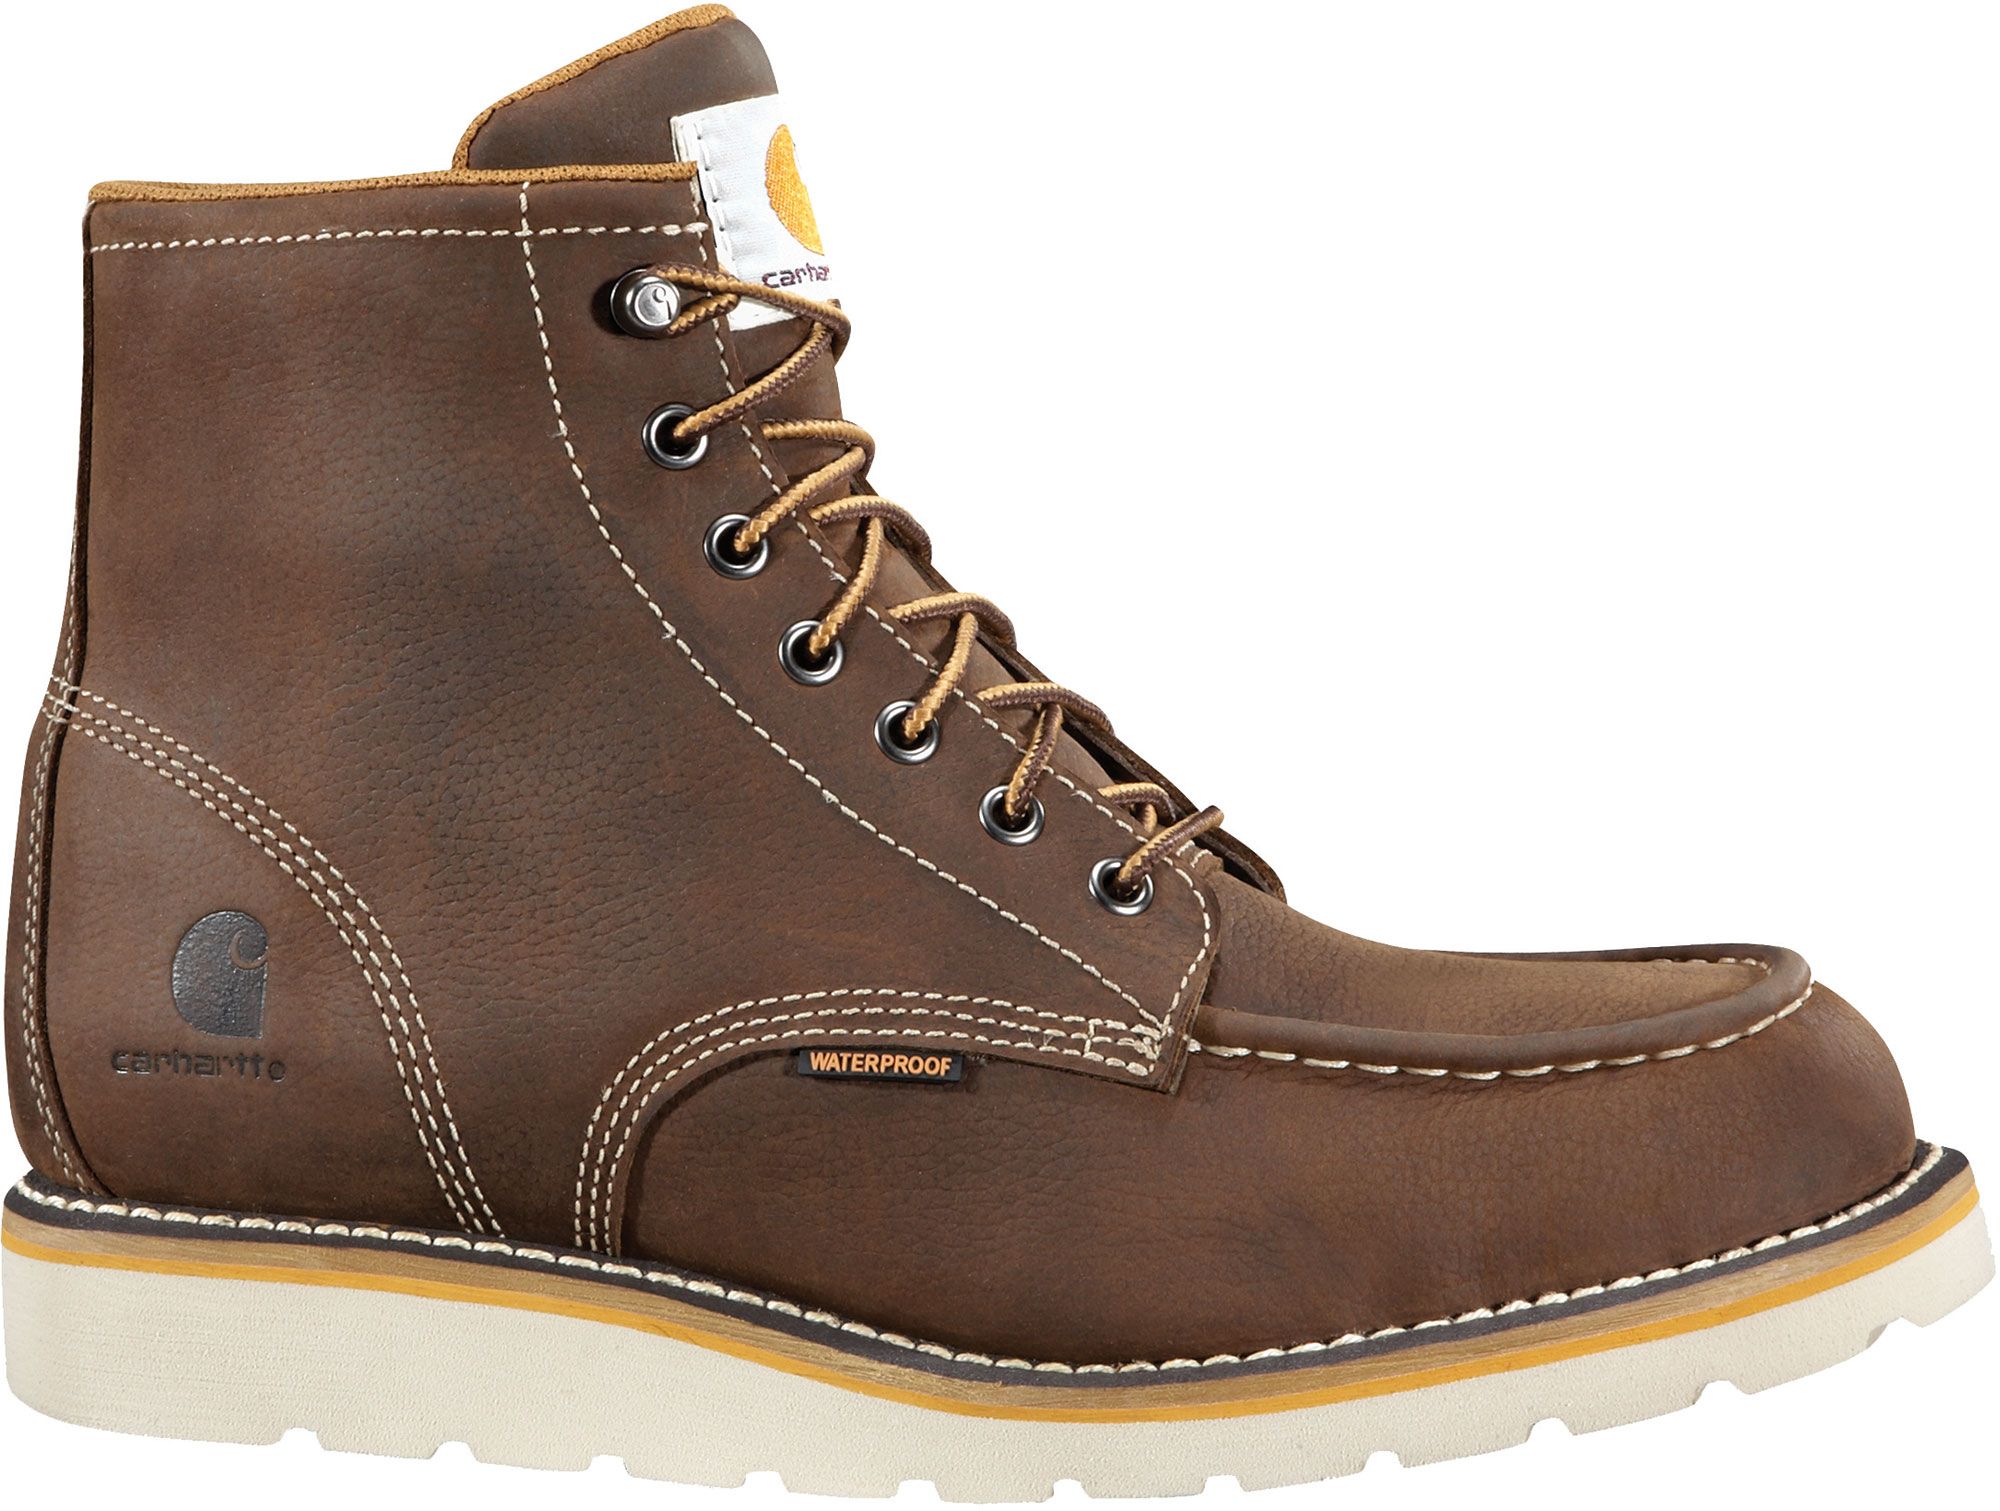 Carhartt Mens 6 Non-Safety Toe Wedge Boots